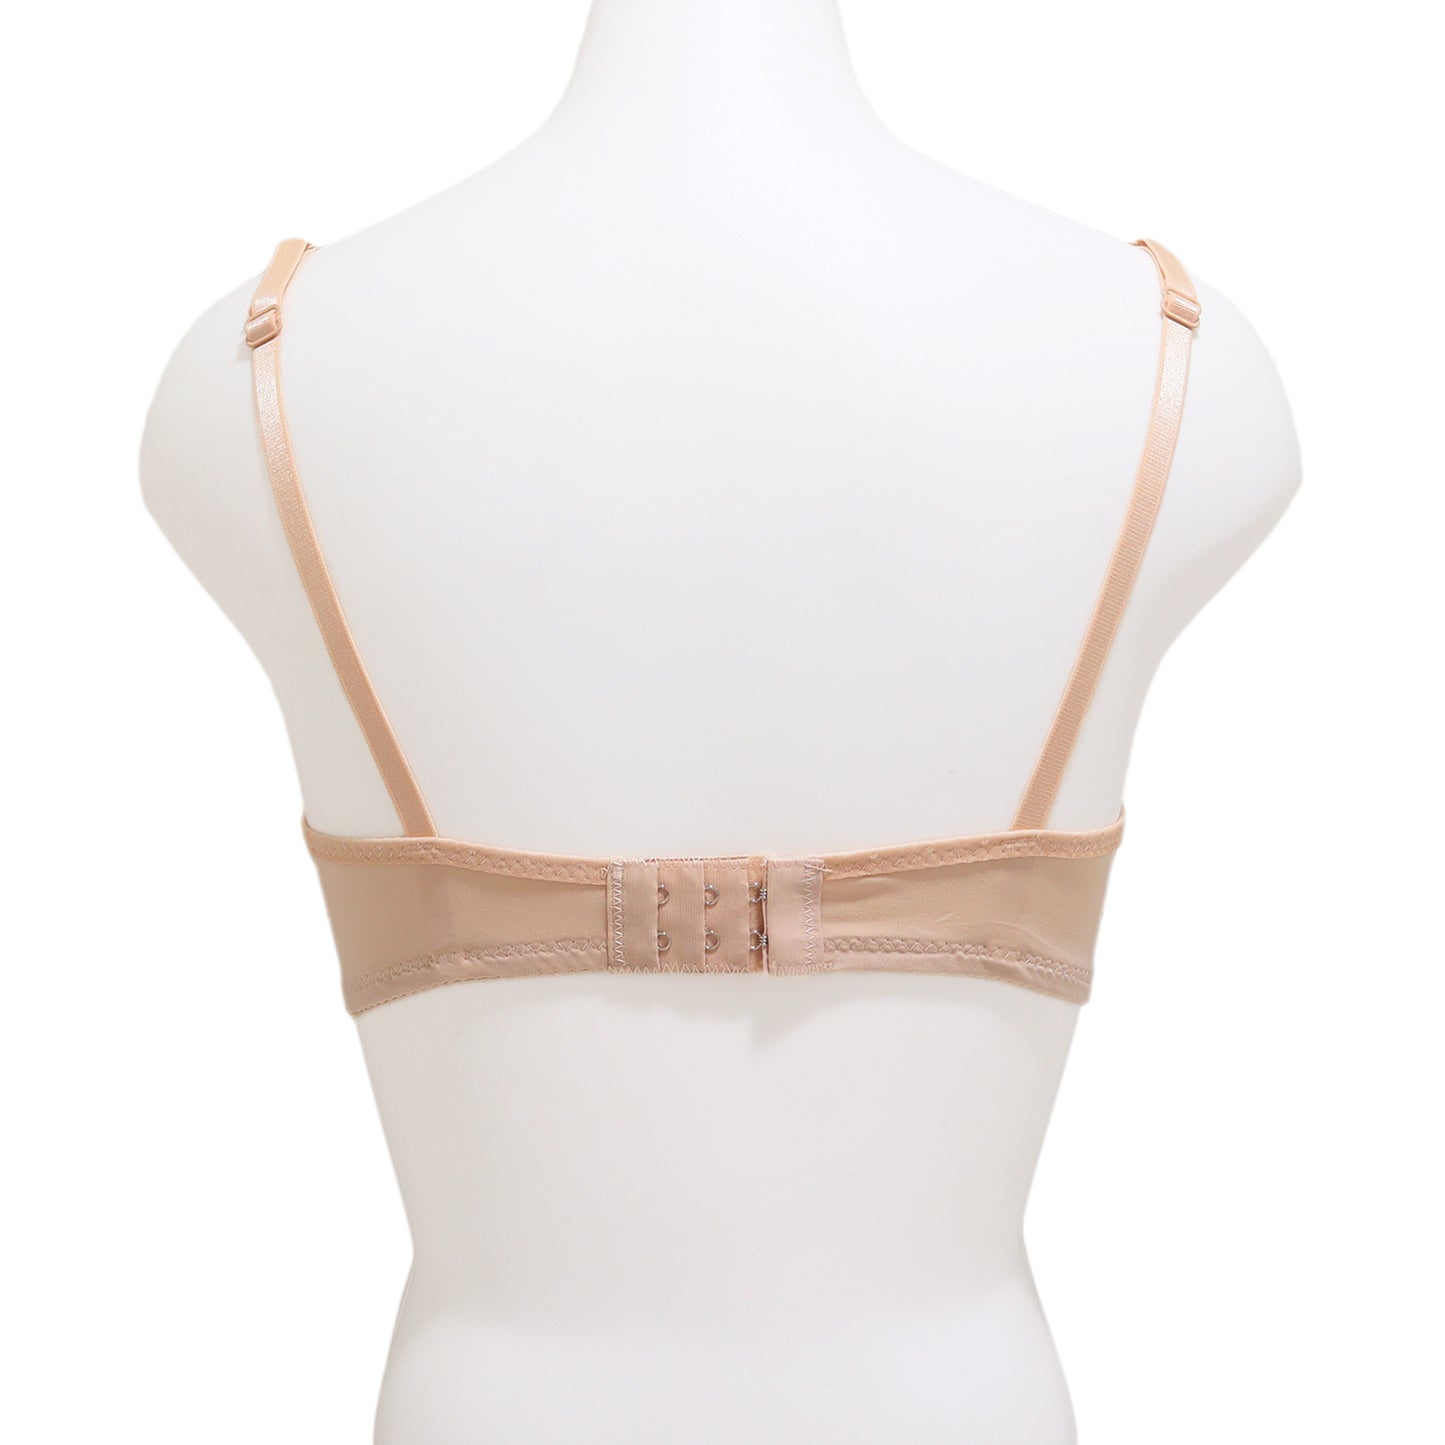 Wired, Push-Up Padded Bras with Adjustable Straps (6-Pack)